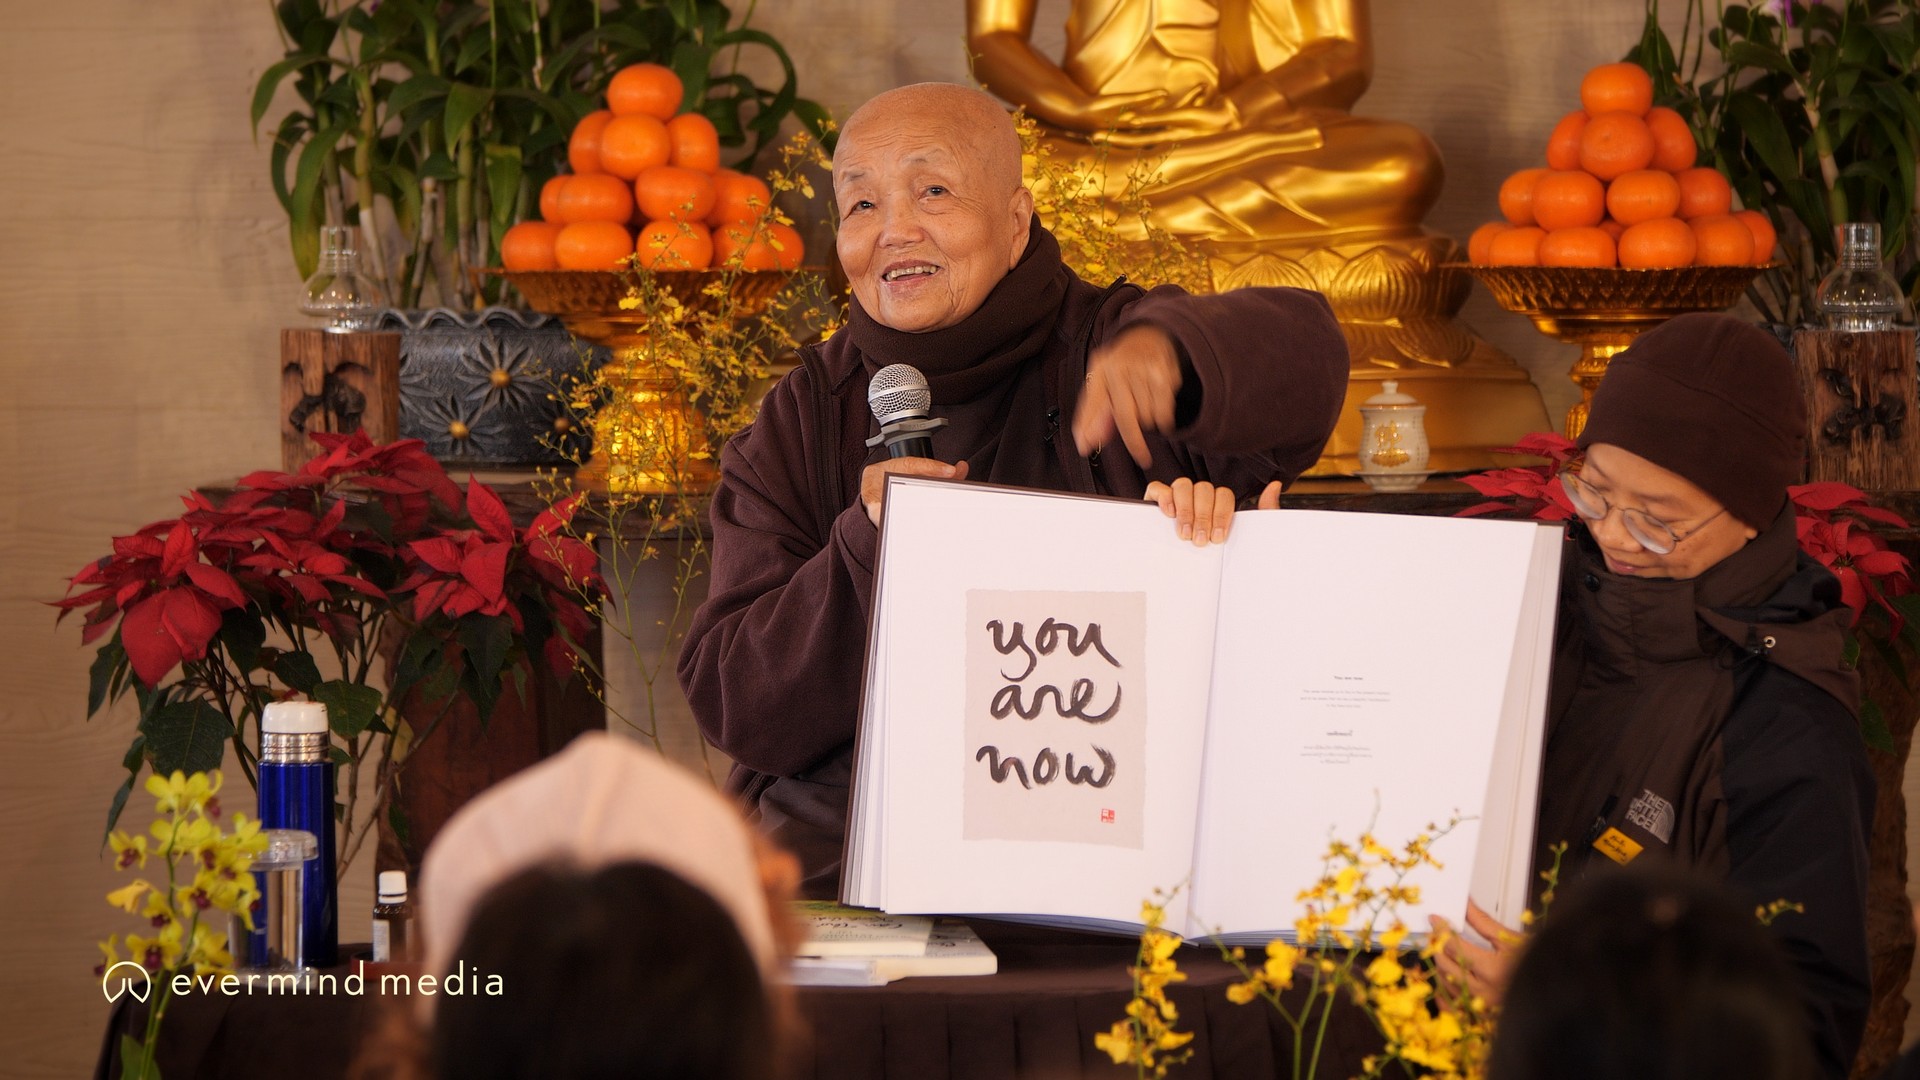 SCCK holds up a calligraphy book with "You Are Now"